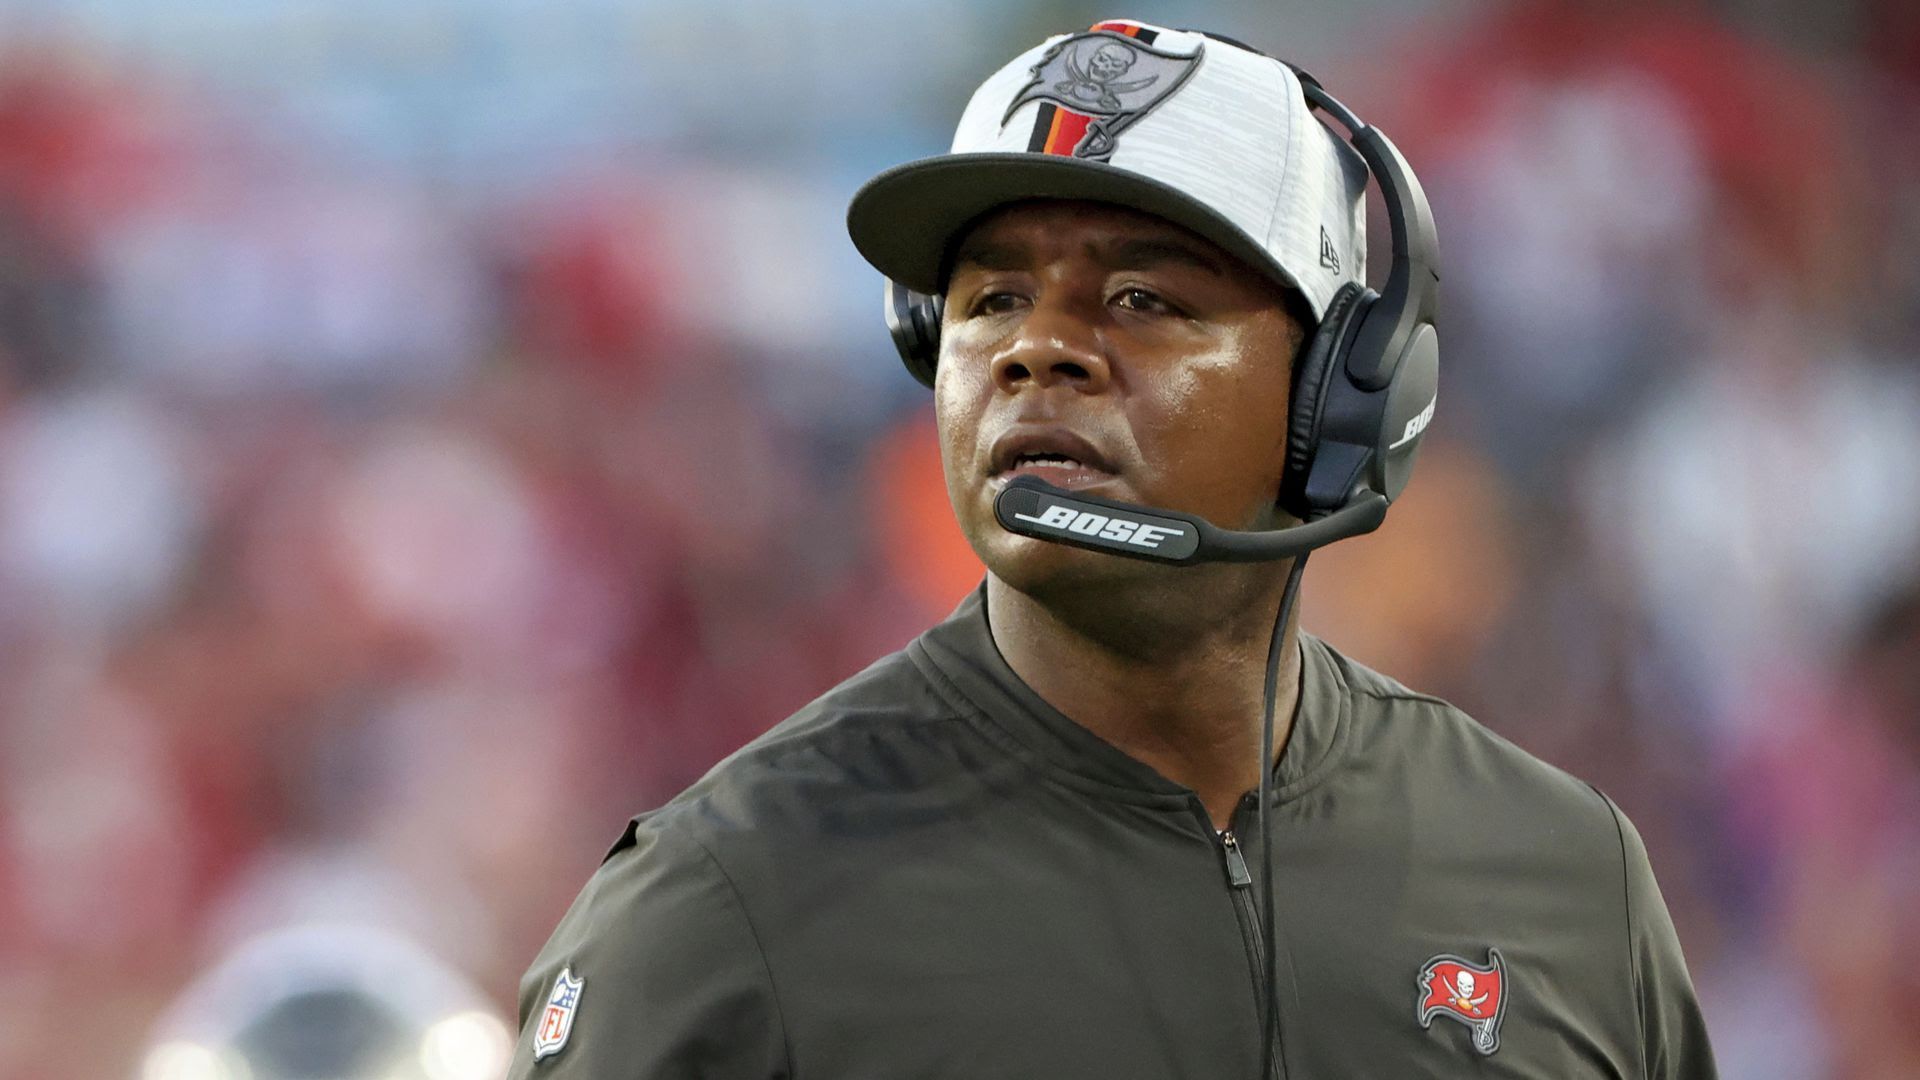 Byron Leftwich wears a headset during a game.